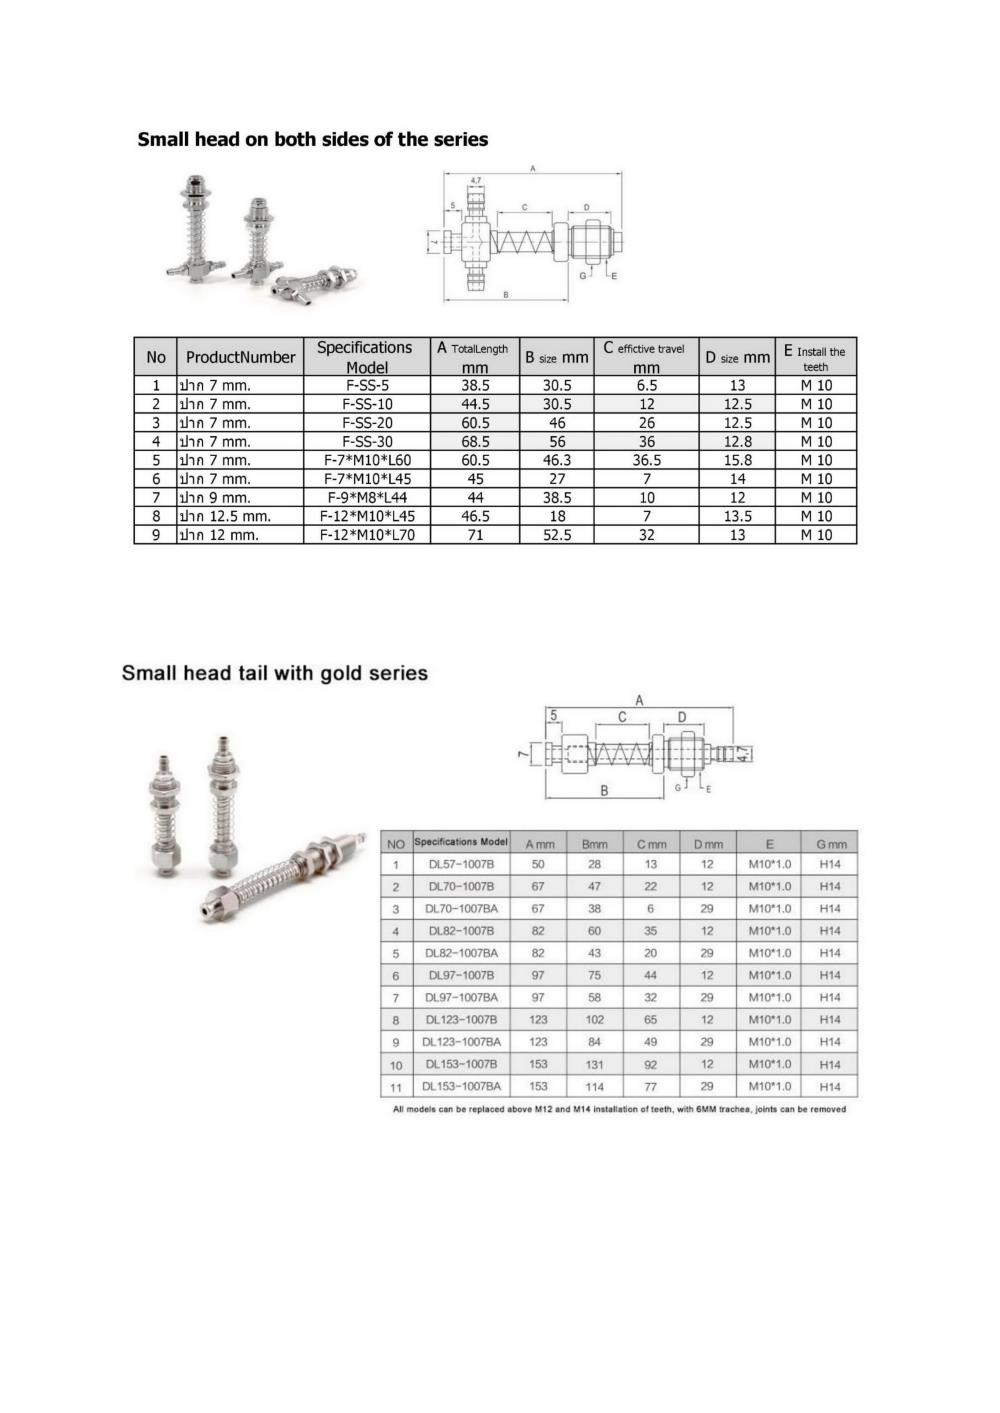 suction stems, holder, sucker base,suction stems, holder, sucker base,none,Automation and Electronics/Automation Equipment/Robotic Components